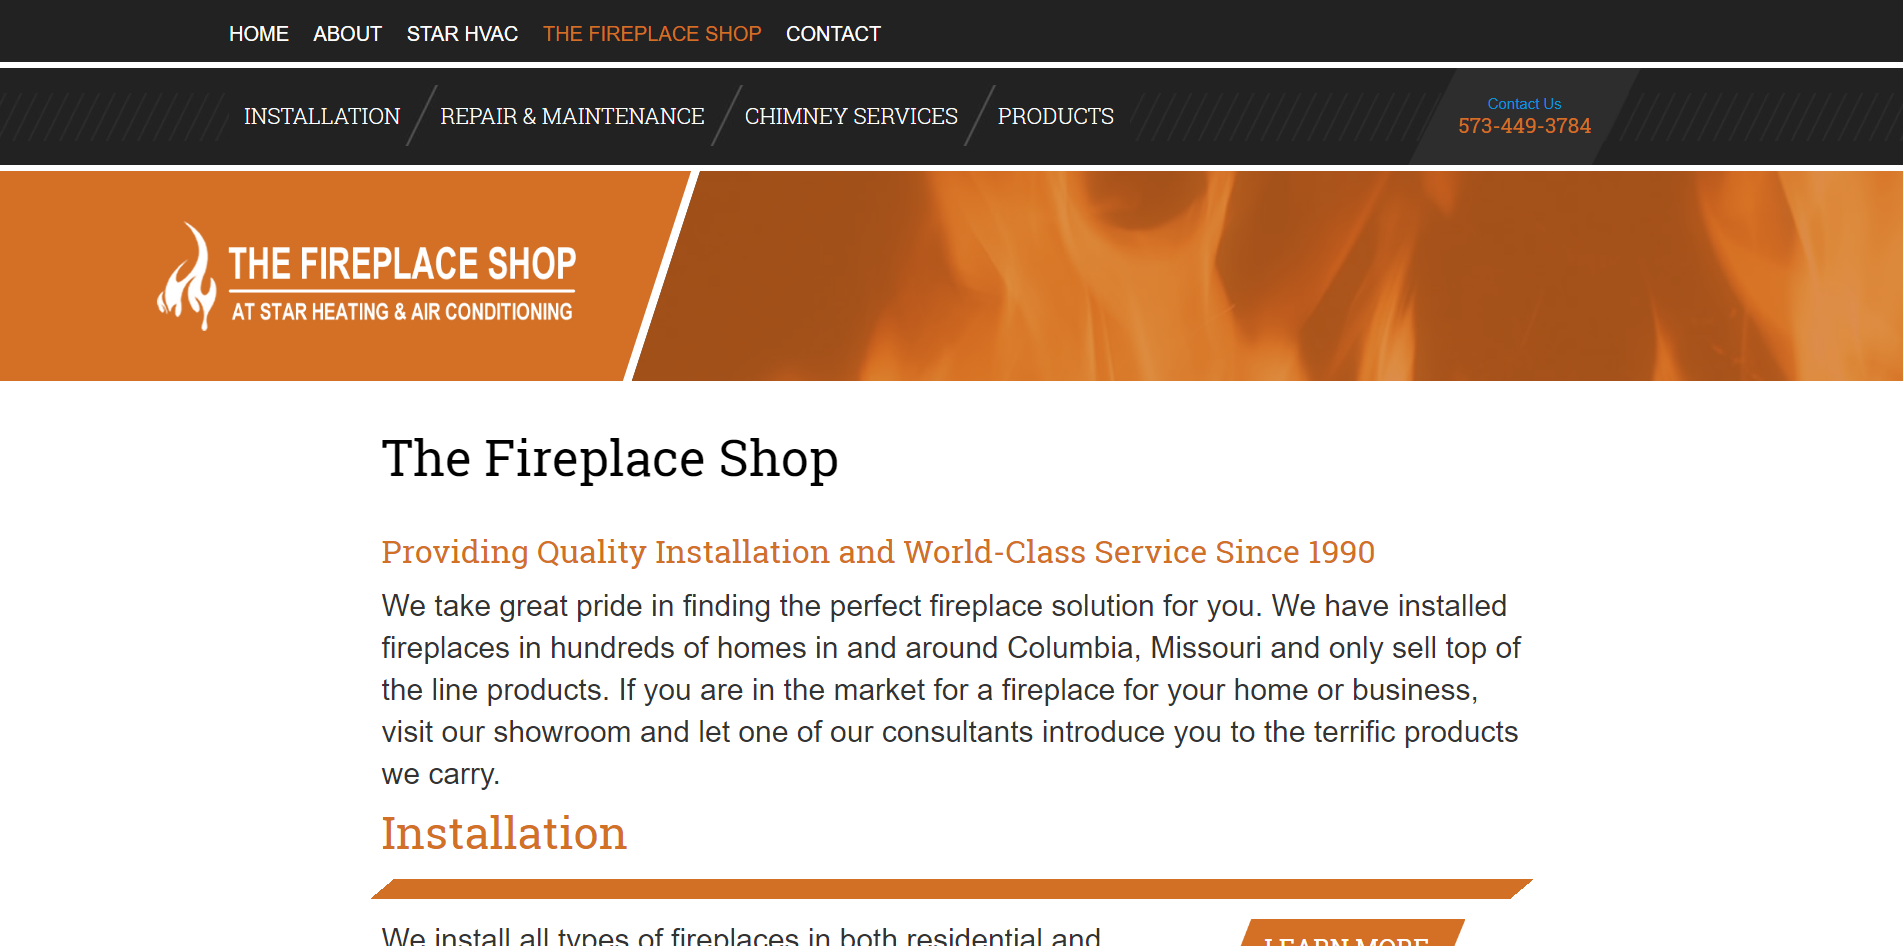 Star Heating and Air Conditioning's New Website: The Fireplace Shop Page